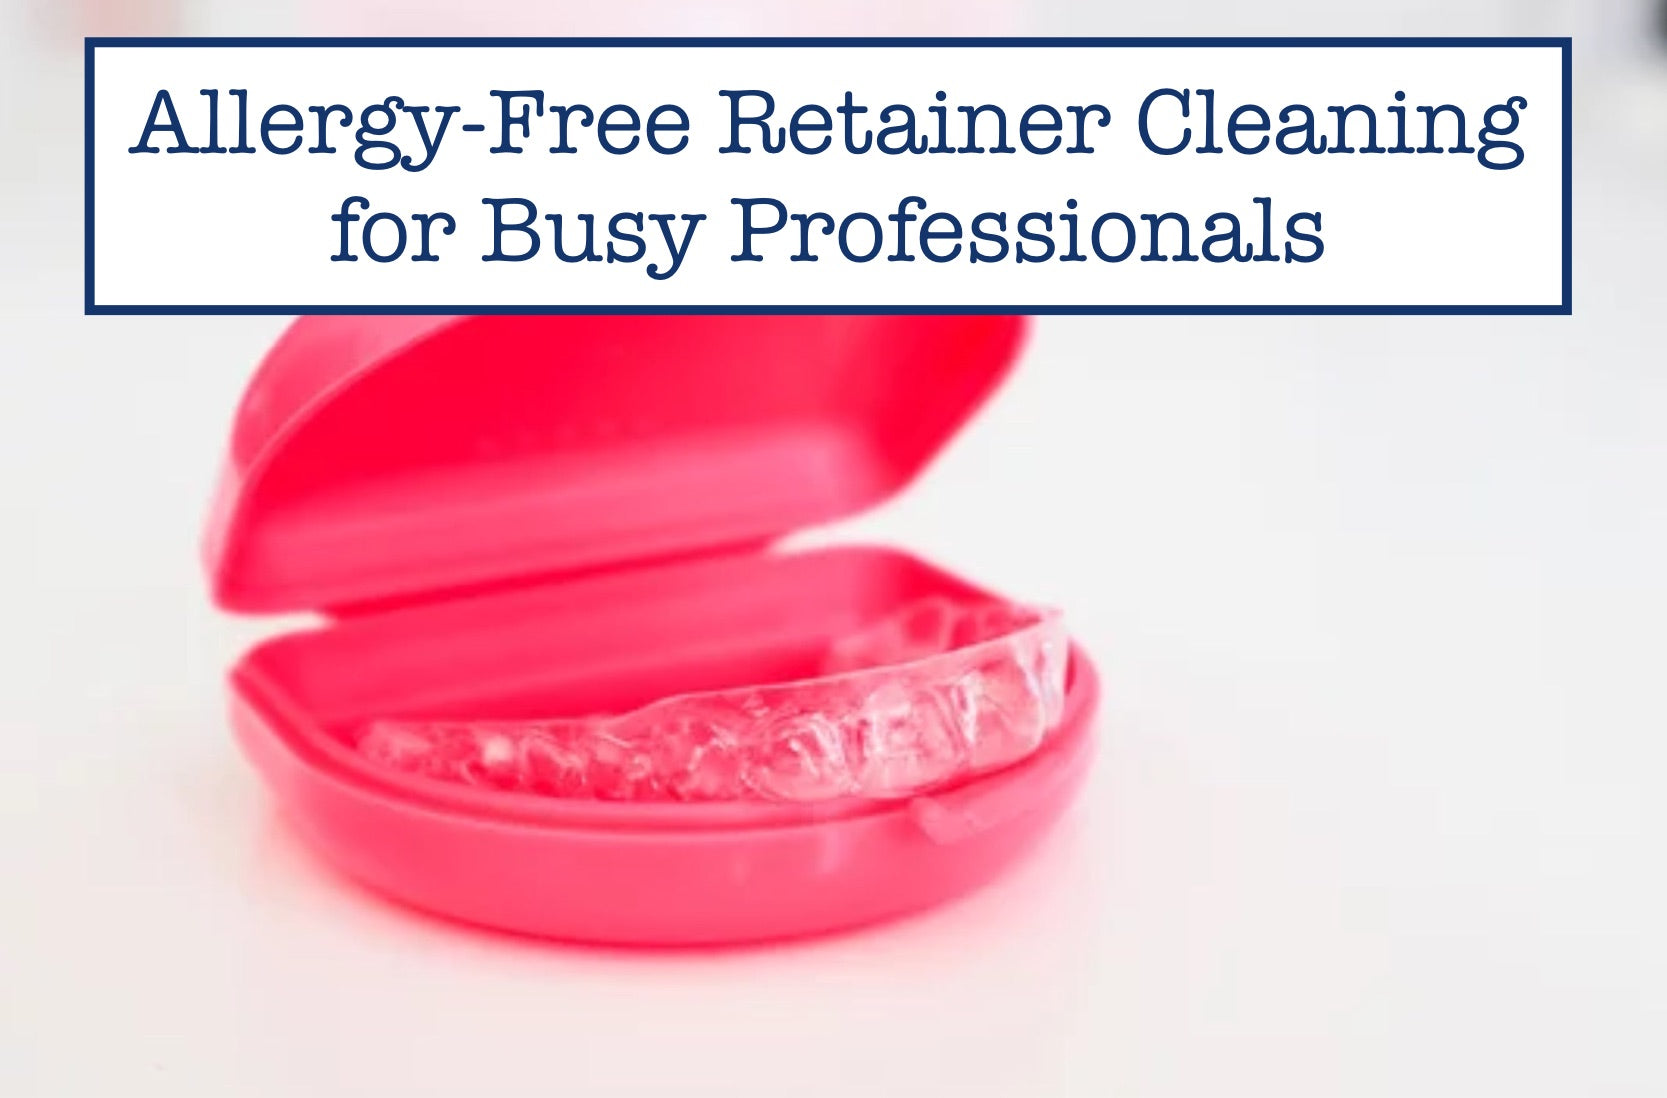 Allergy-Free Retainer Cleaning for Busy Professionals